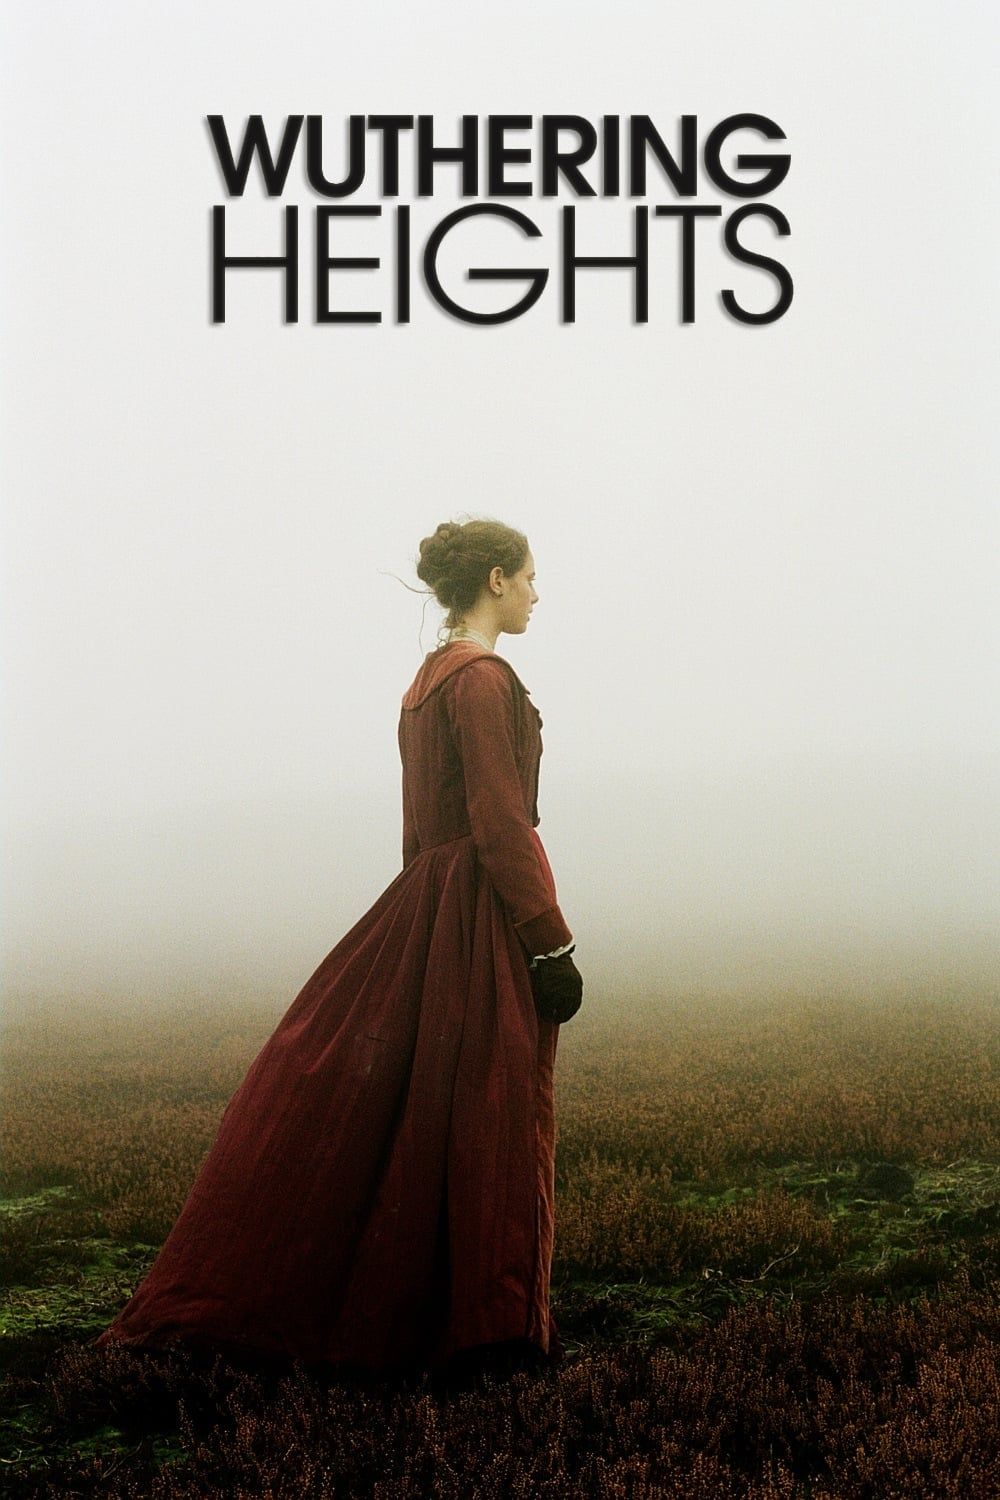 The Best Wuthering Heights Adaptation Is a Small Indie Movie